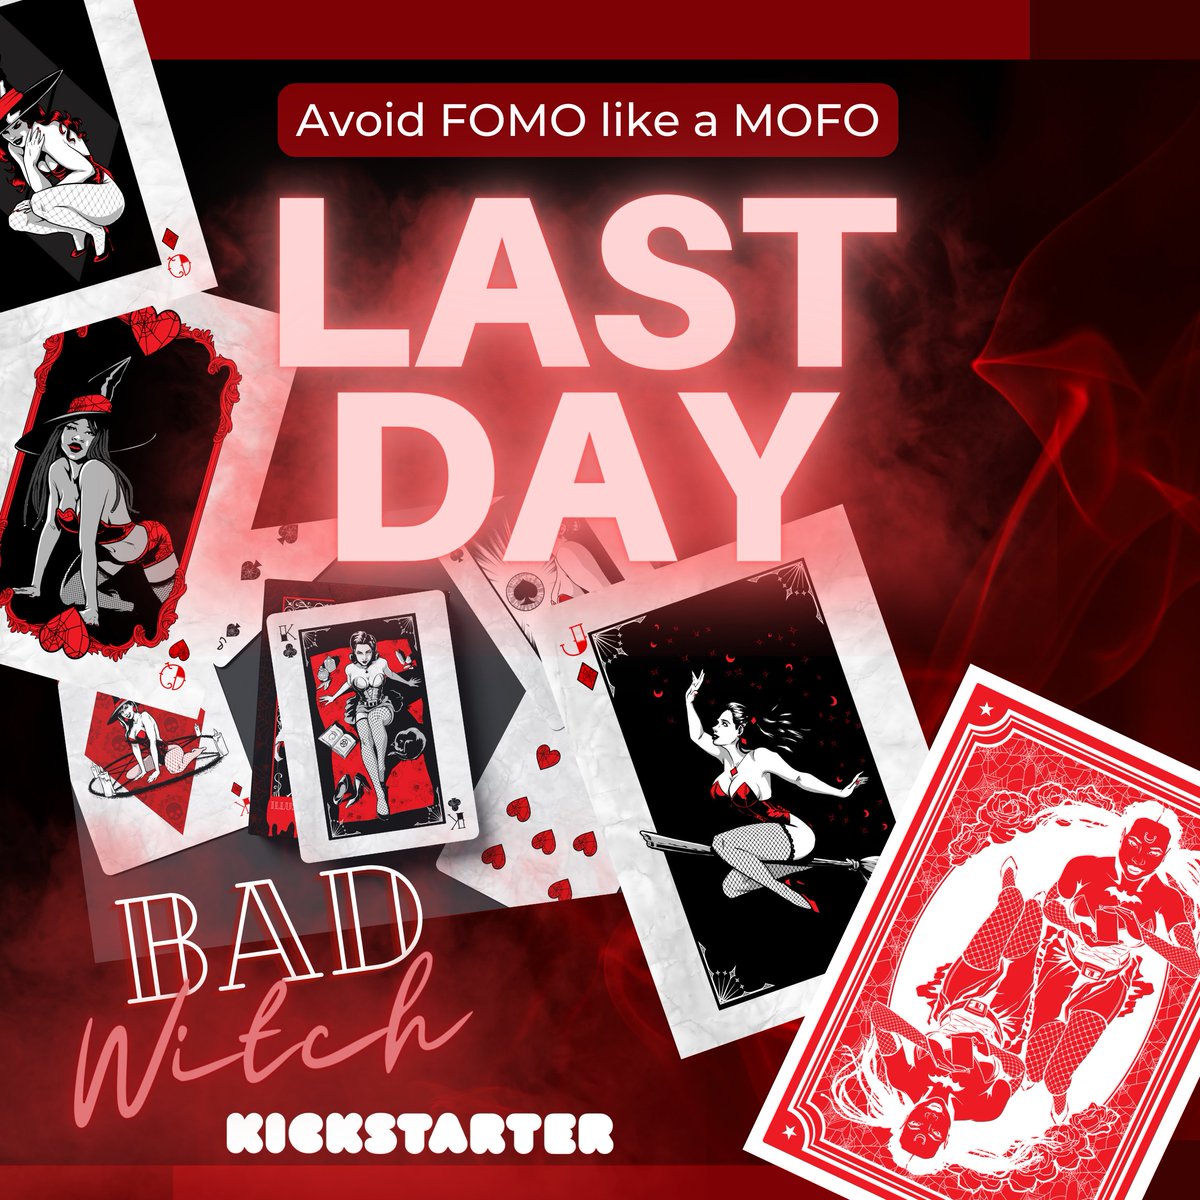 Less than 24 hours left!
 #playingcard #cardistry #playingcards #artofplay #playingcardcollection #playingcardart #deckofcards #tabletopgames #cardgames #pinup #pinupgirl #vintage #pinupstyle #pinupmodel #kickstarter #witchstarter #hocuspocus #badwitch #gamenight #game